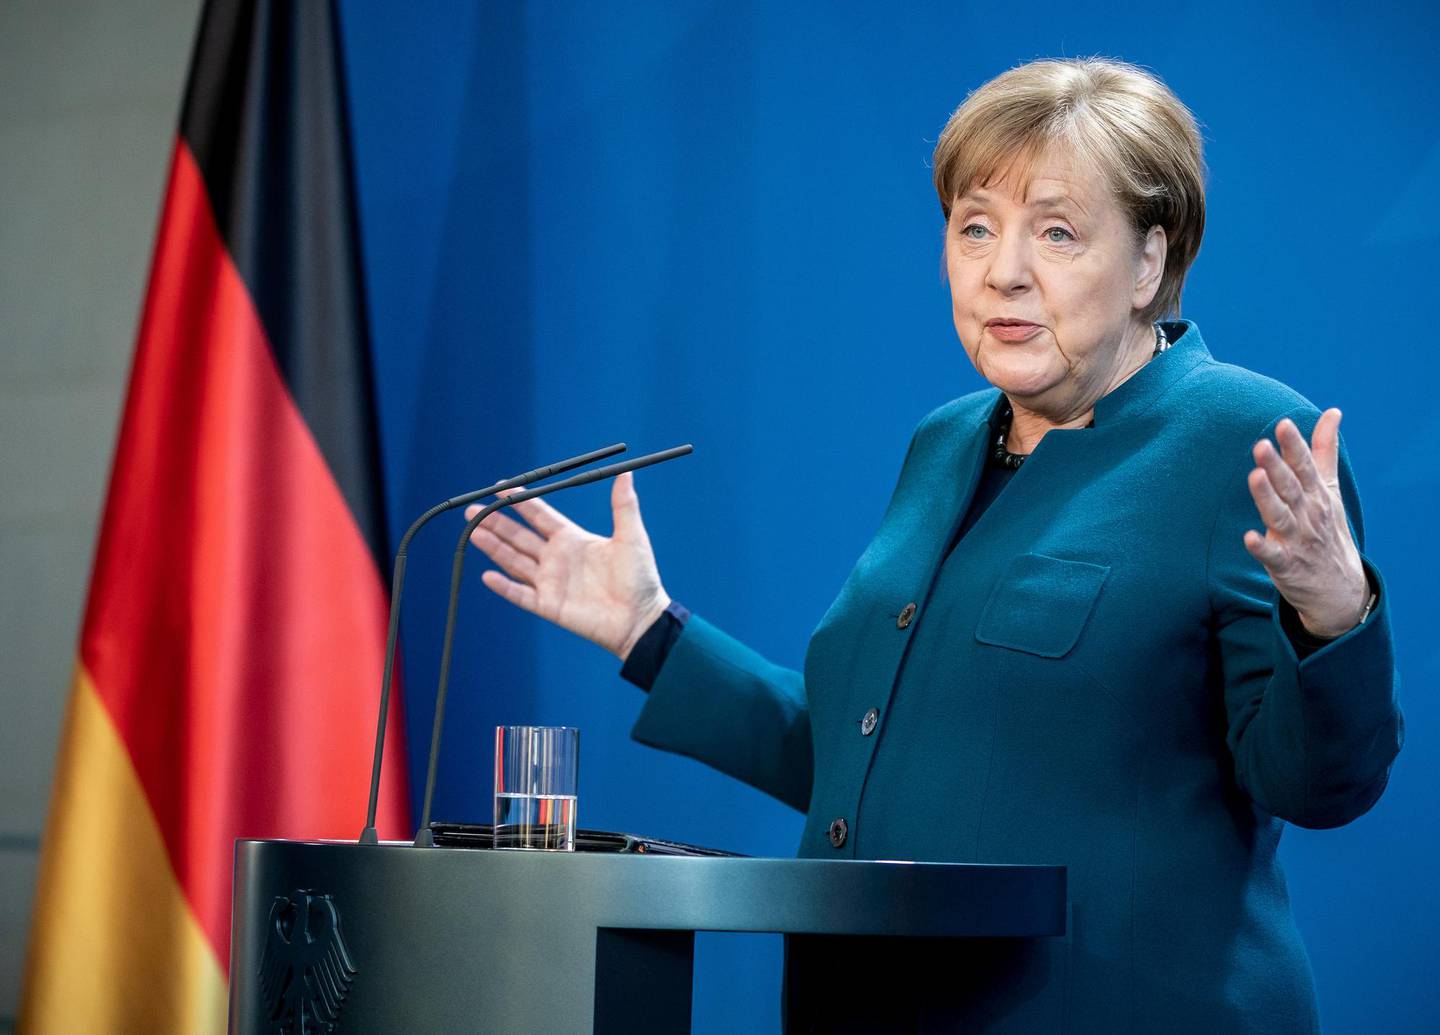 FILE PHOTO: German Chancellor Angela Merkel gives a media statement on the spread of the new coronavirus disease (COVID-19) at the Chancellery in Berlin, Germany, March 22, 2020.   Michel Kappeler/Pool via REUTERS/File Photo